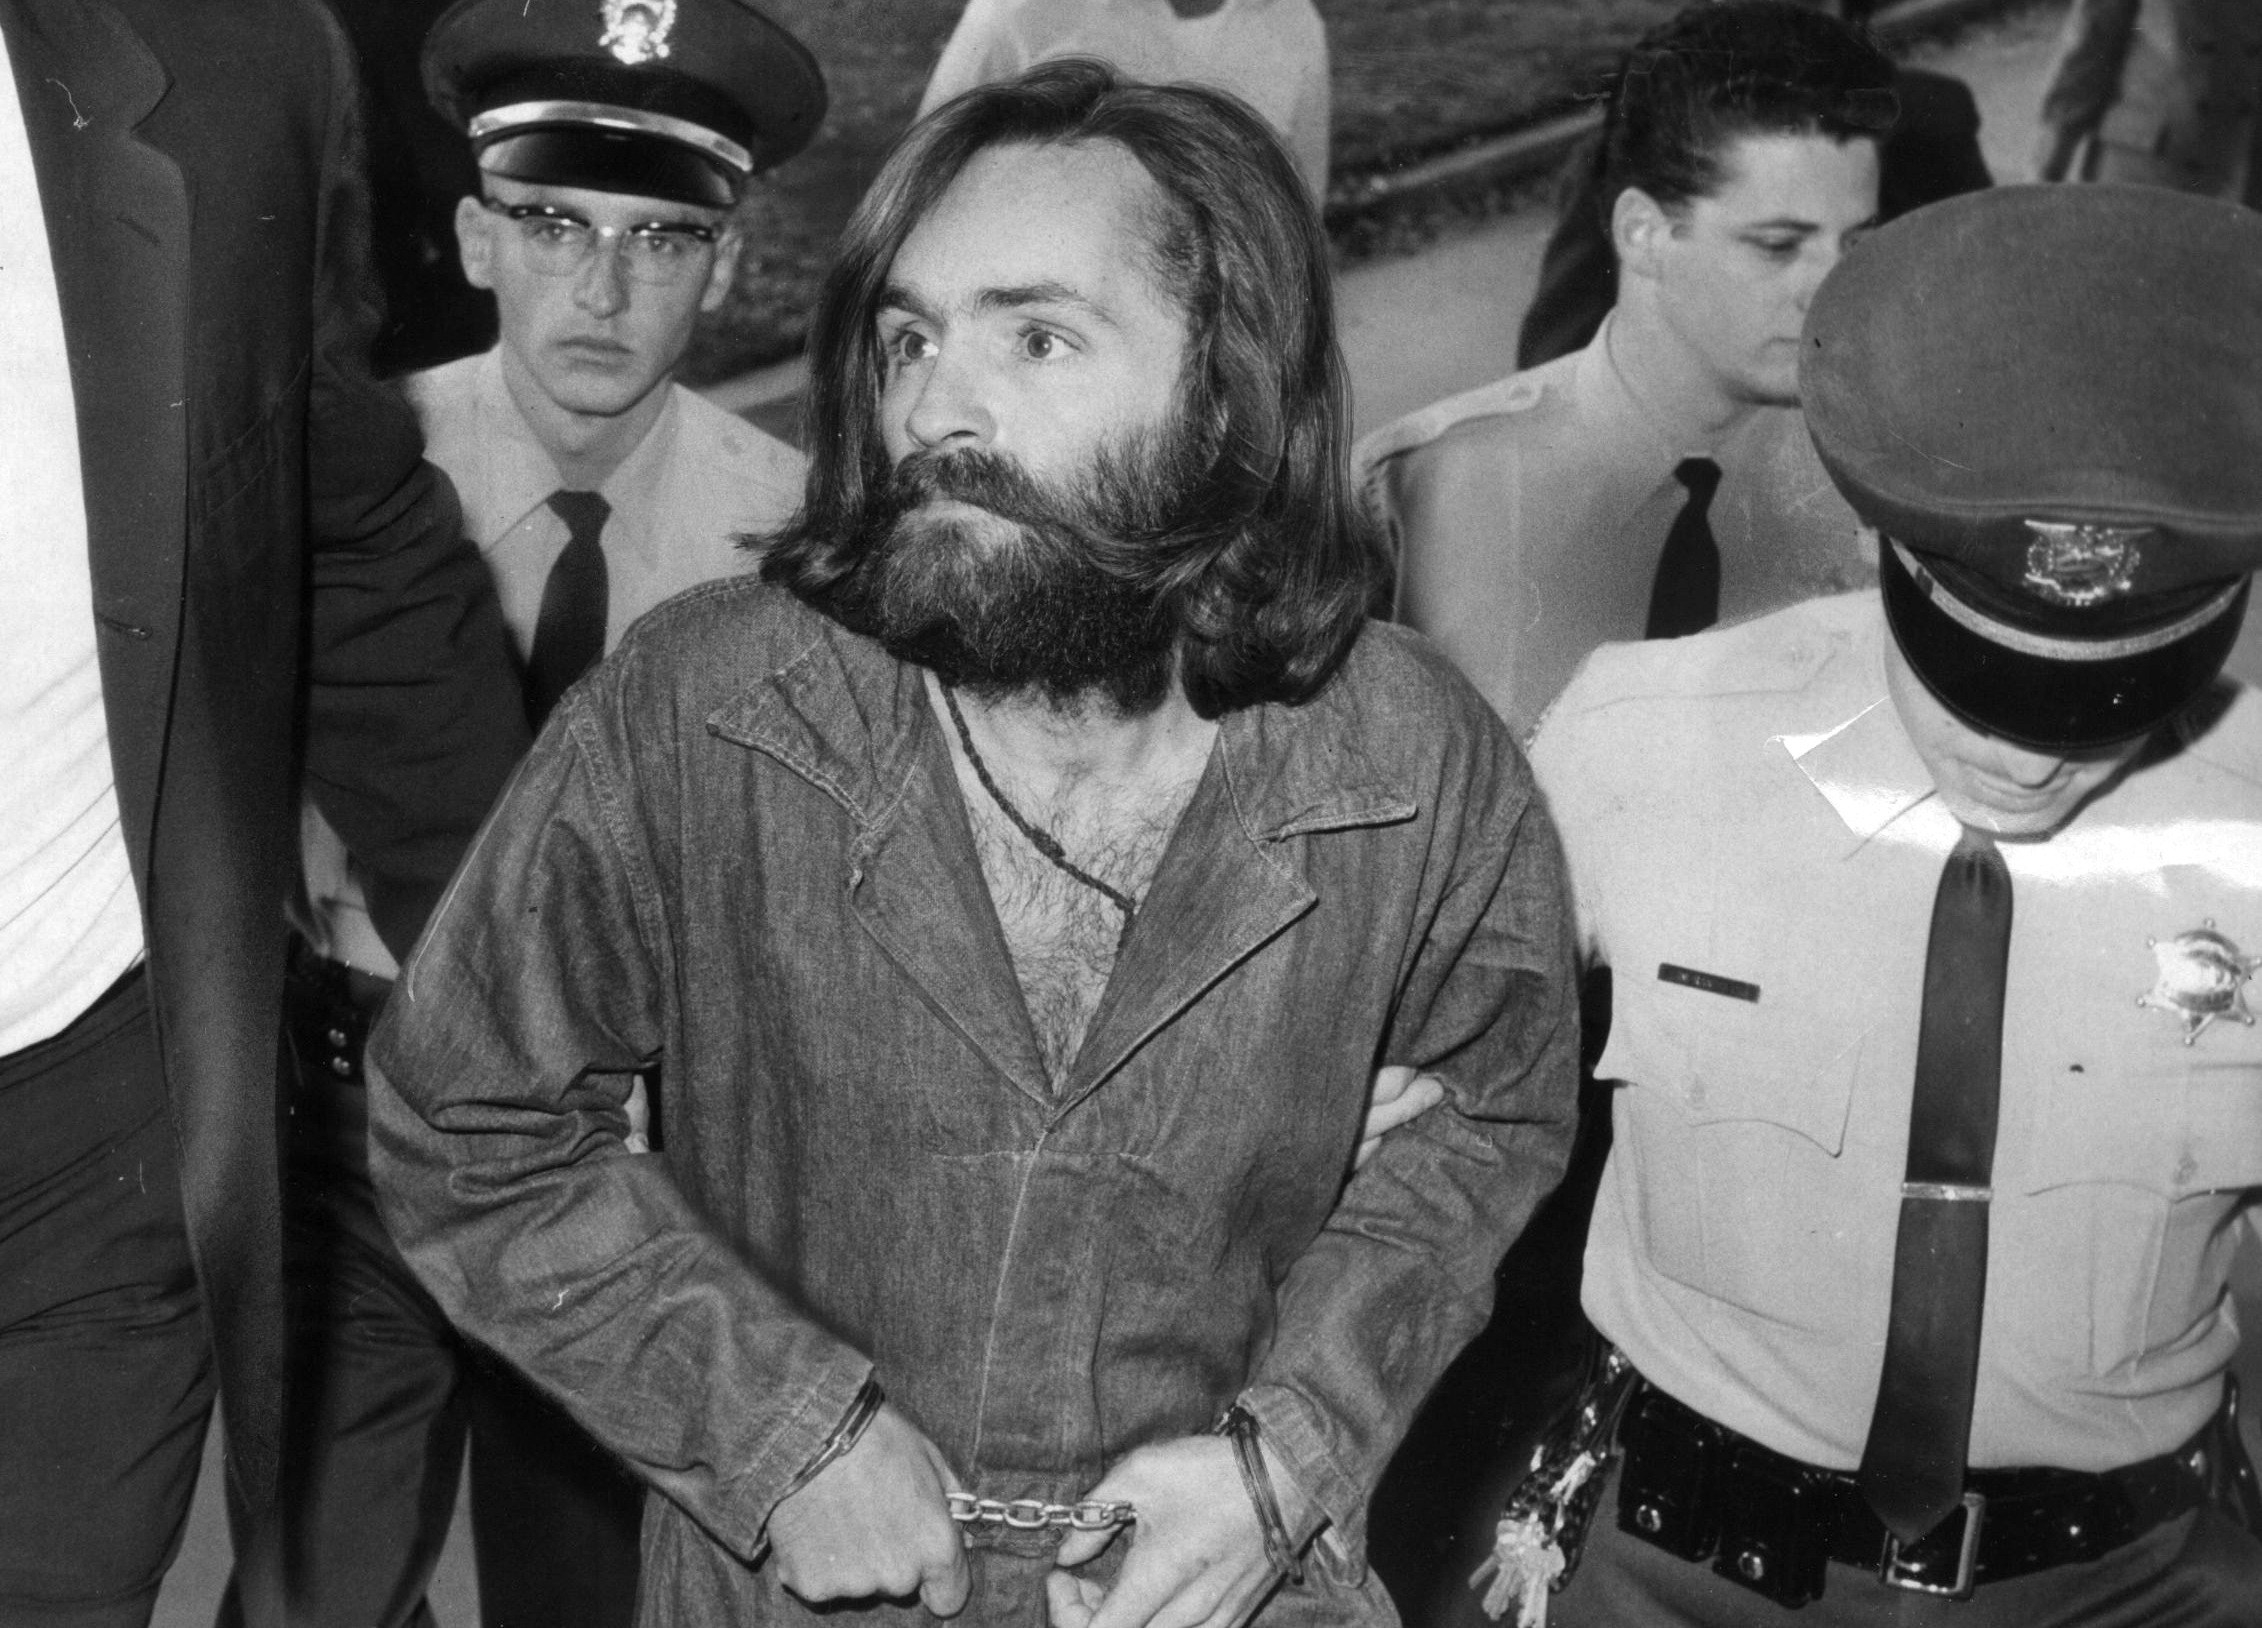 Charles Manson being escorted into prison